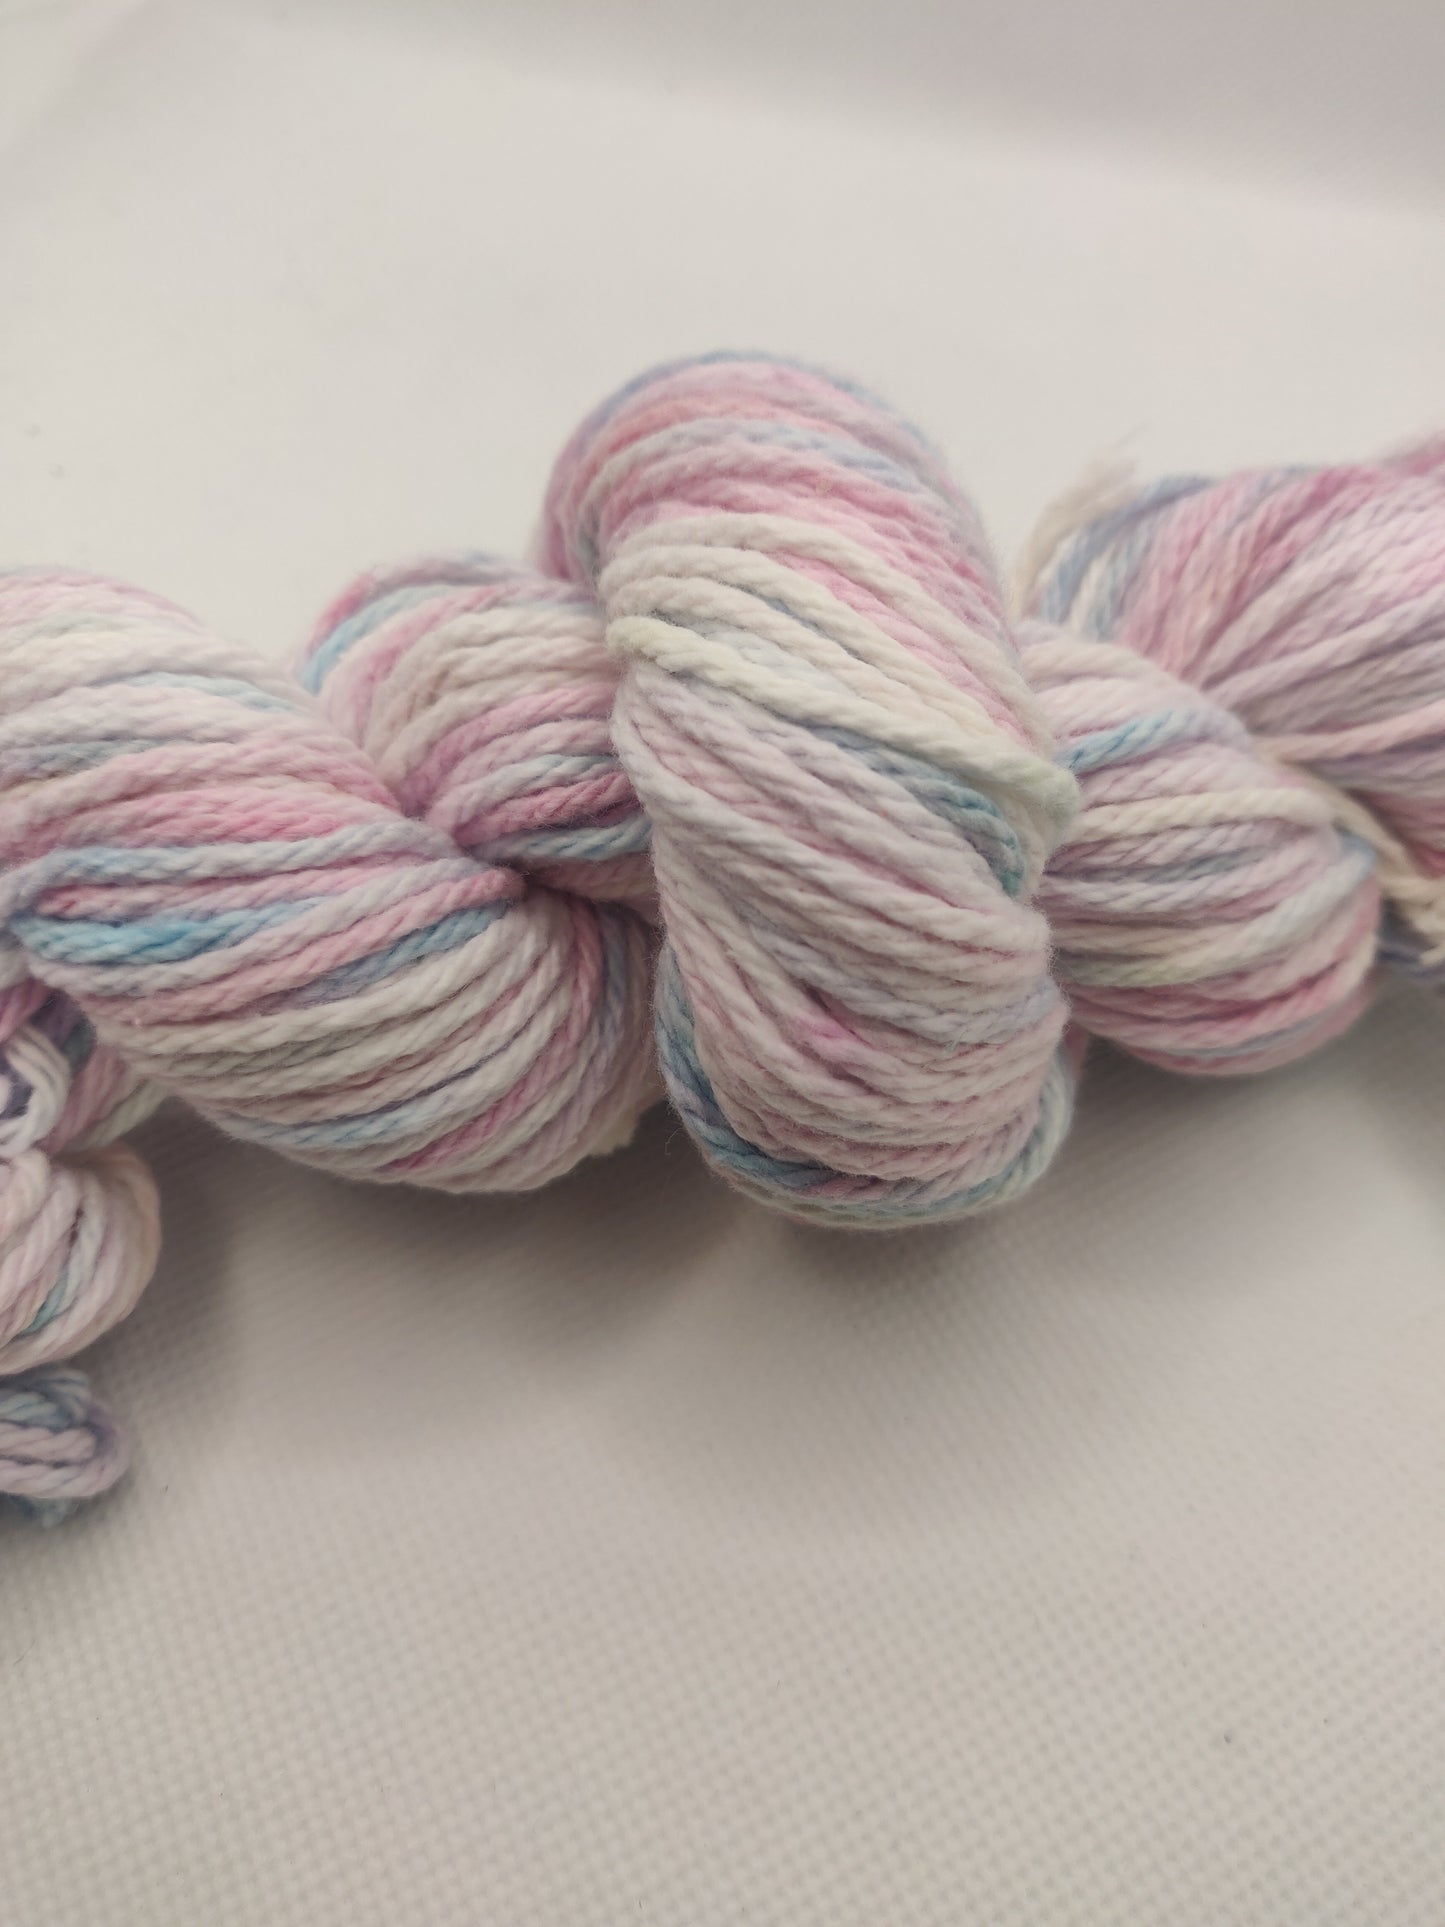 Cottton Candy - Hand Dyed Cotton Yarn